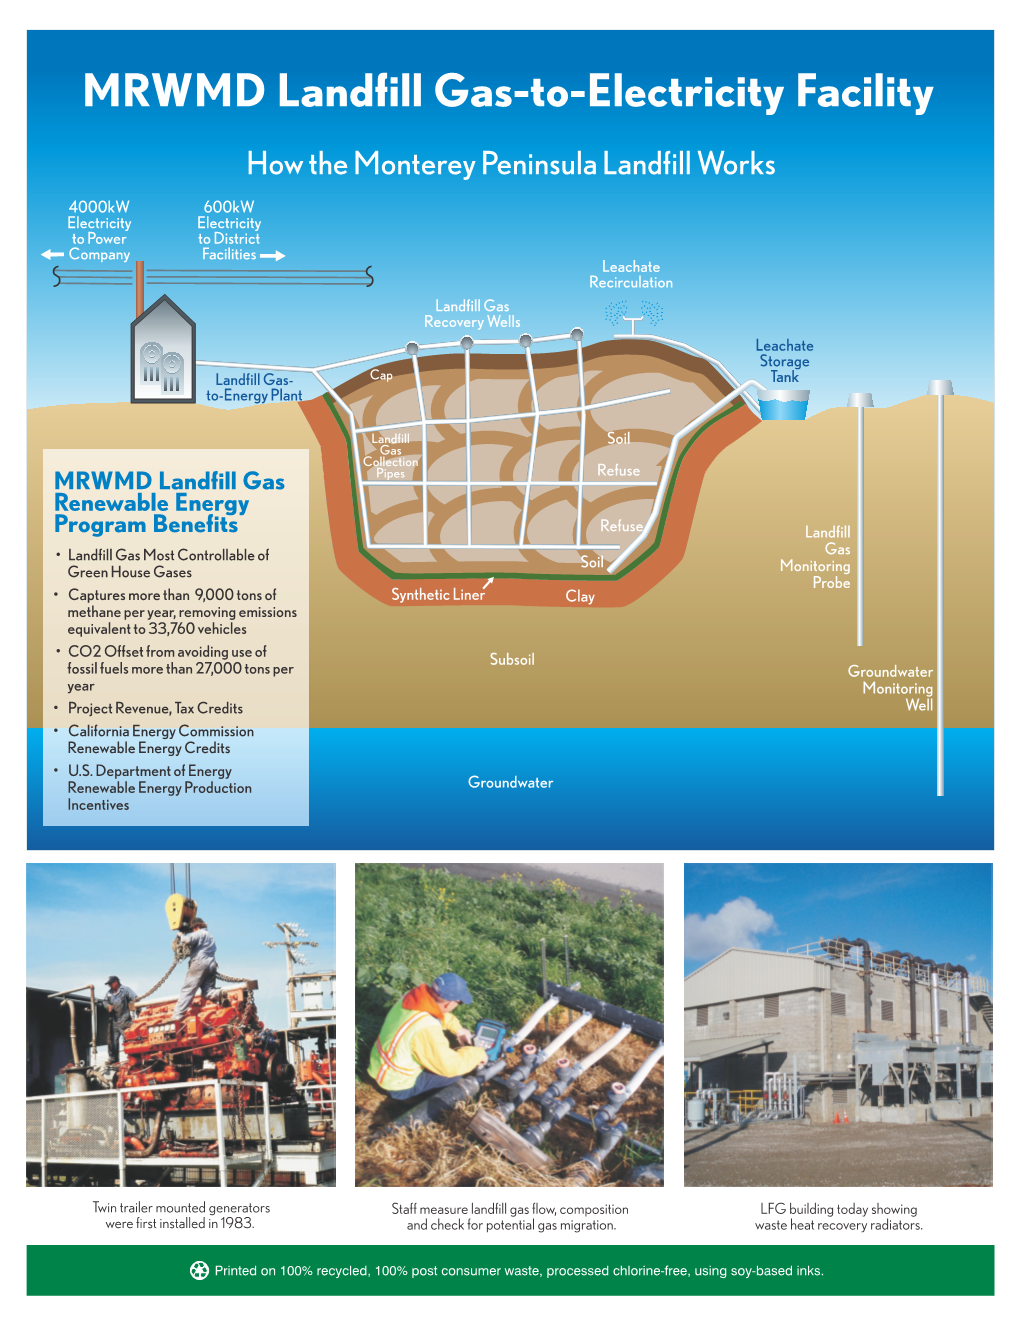 MRWMD Landfill Gas-To-Electricity Facility